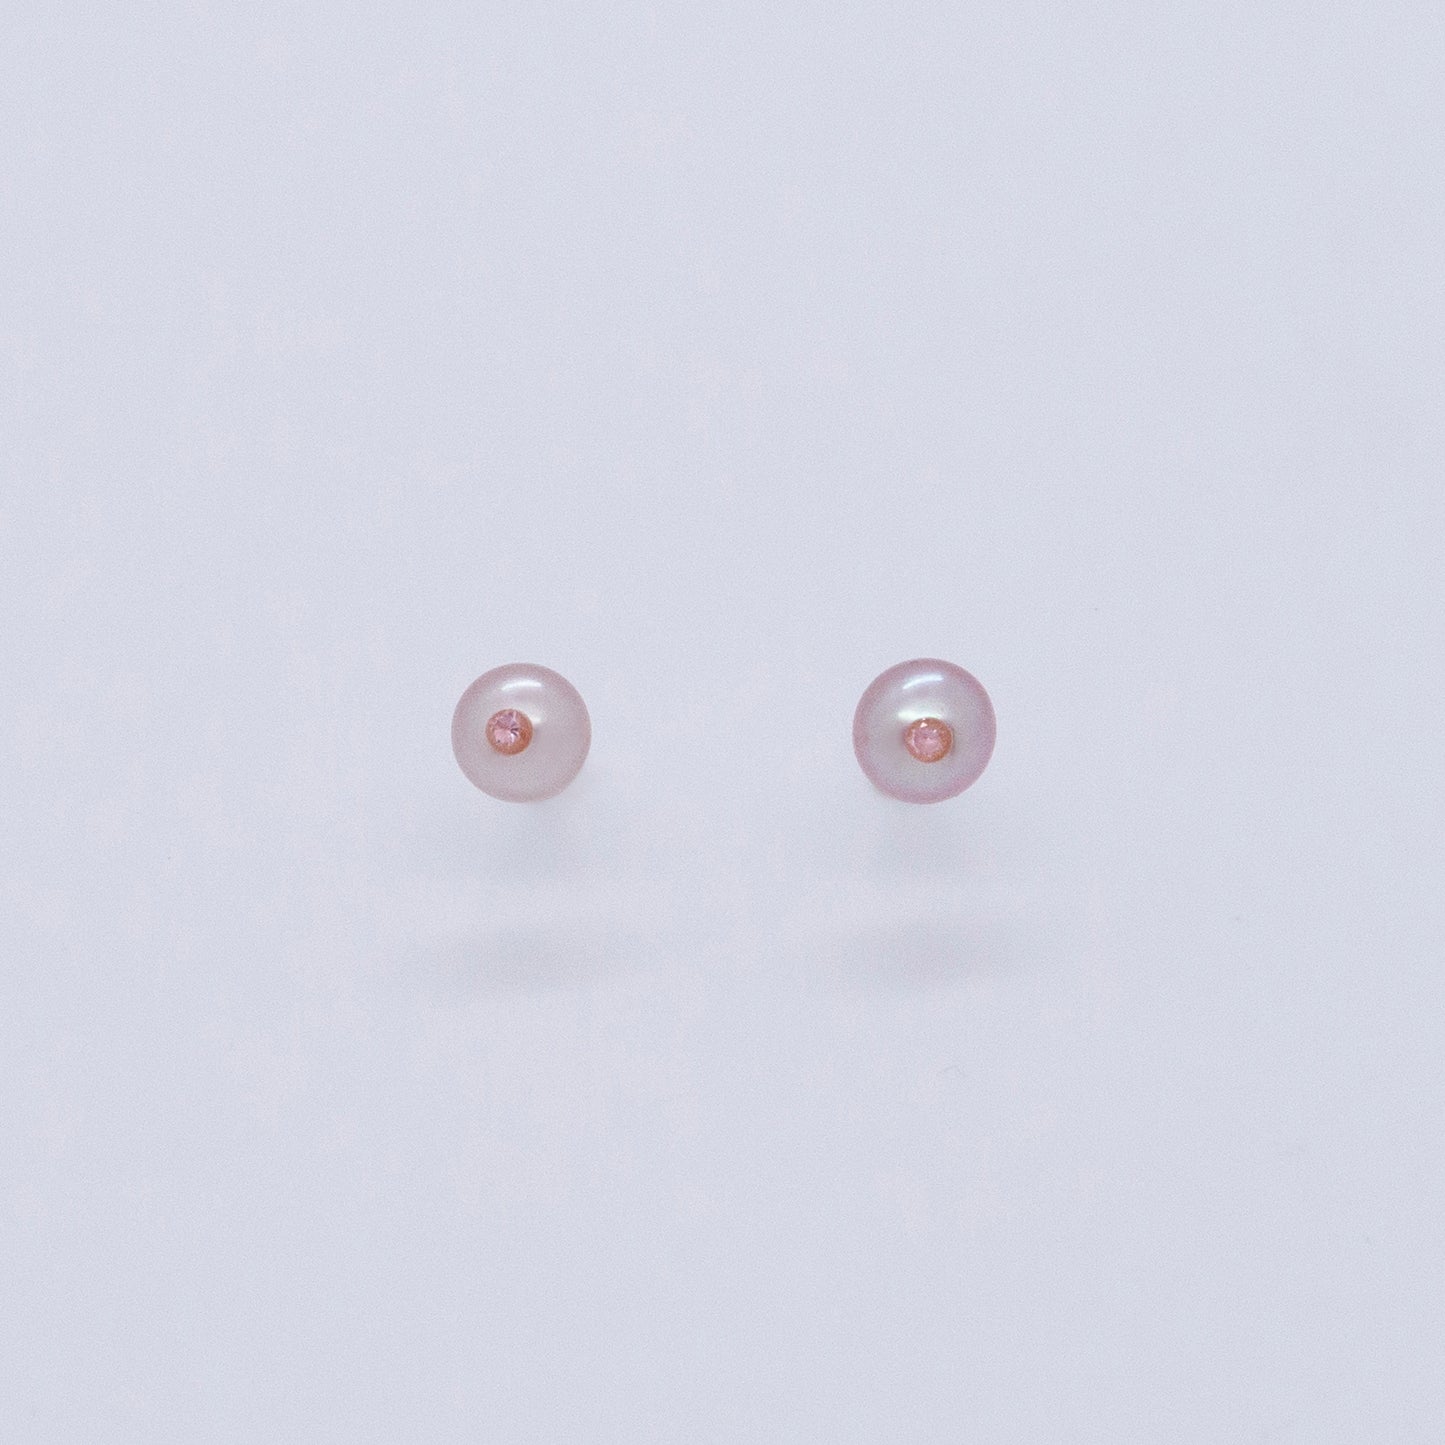 Multiverse - Classic 5mm CZ Lavender Pearl Earrings (Cherry Blossom)